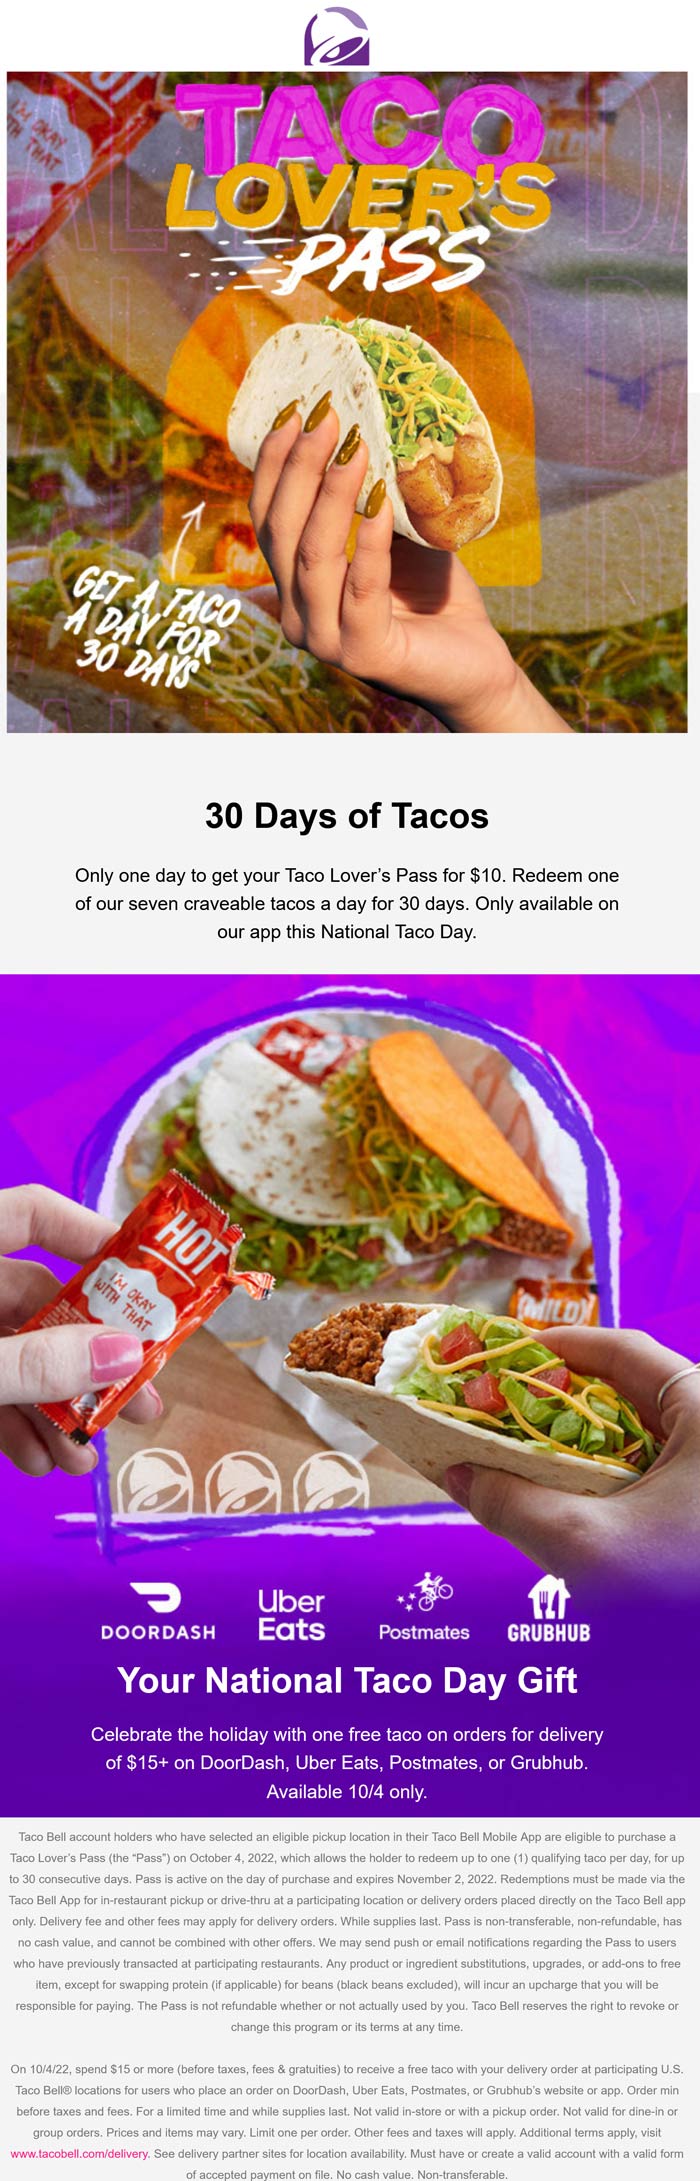 Taco Bell restaurants Coupon  Taco per day for 30 days = $10 today via mobile at Taco Bell, also free taco on delivery #tacobell 